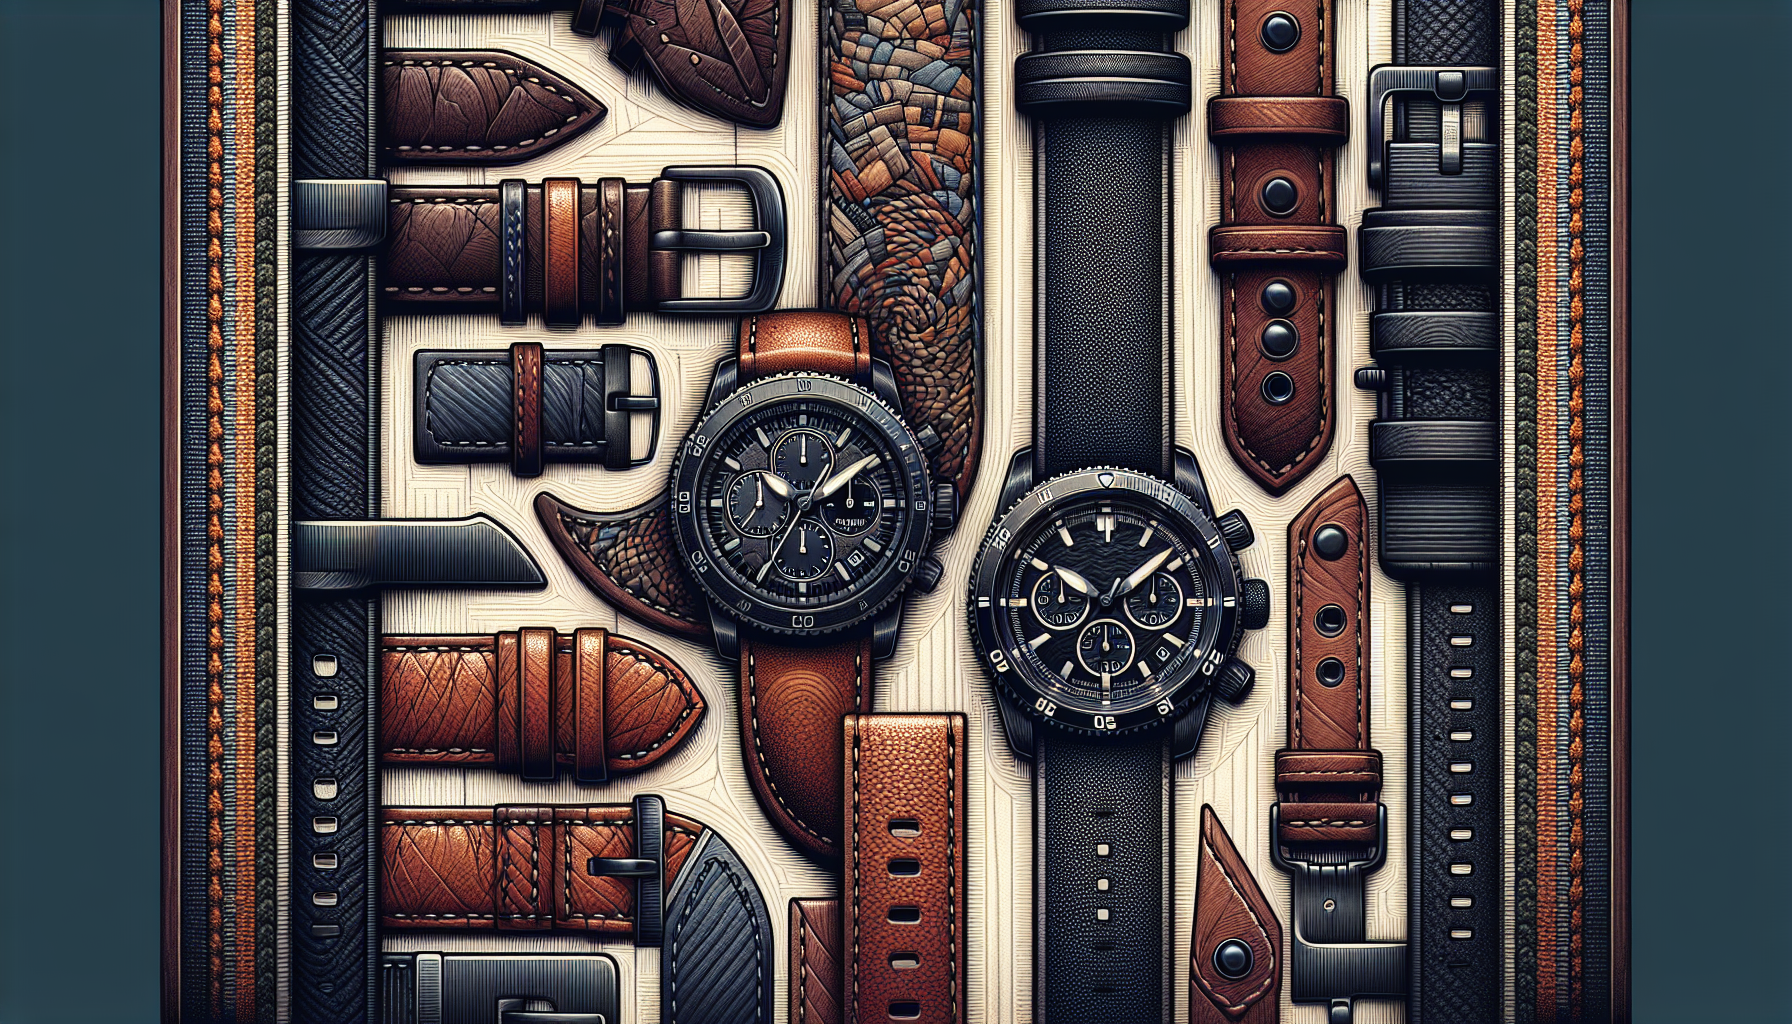 Variety of 21mm watch straps including leather, canvas, and rubber